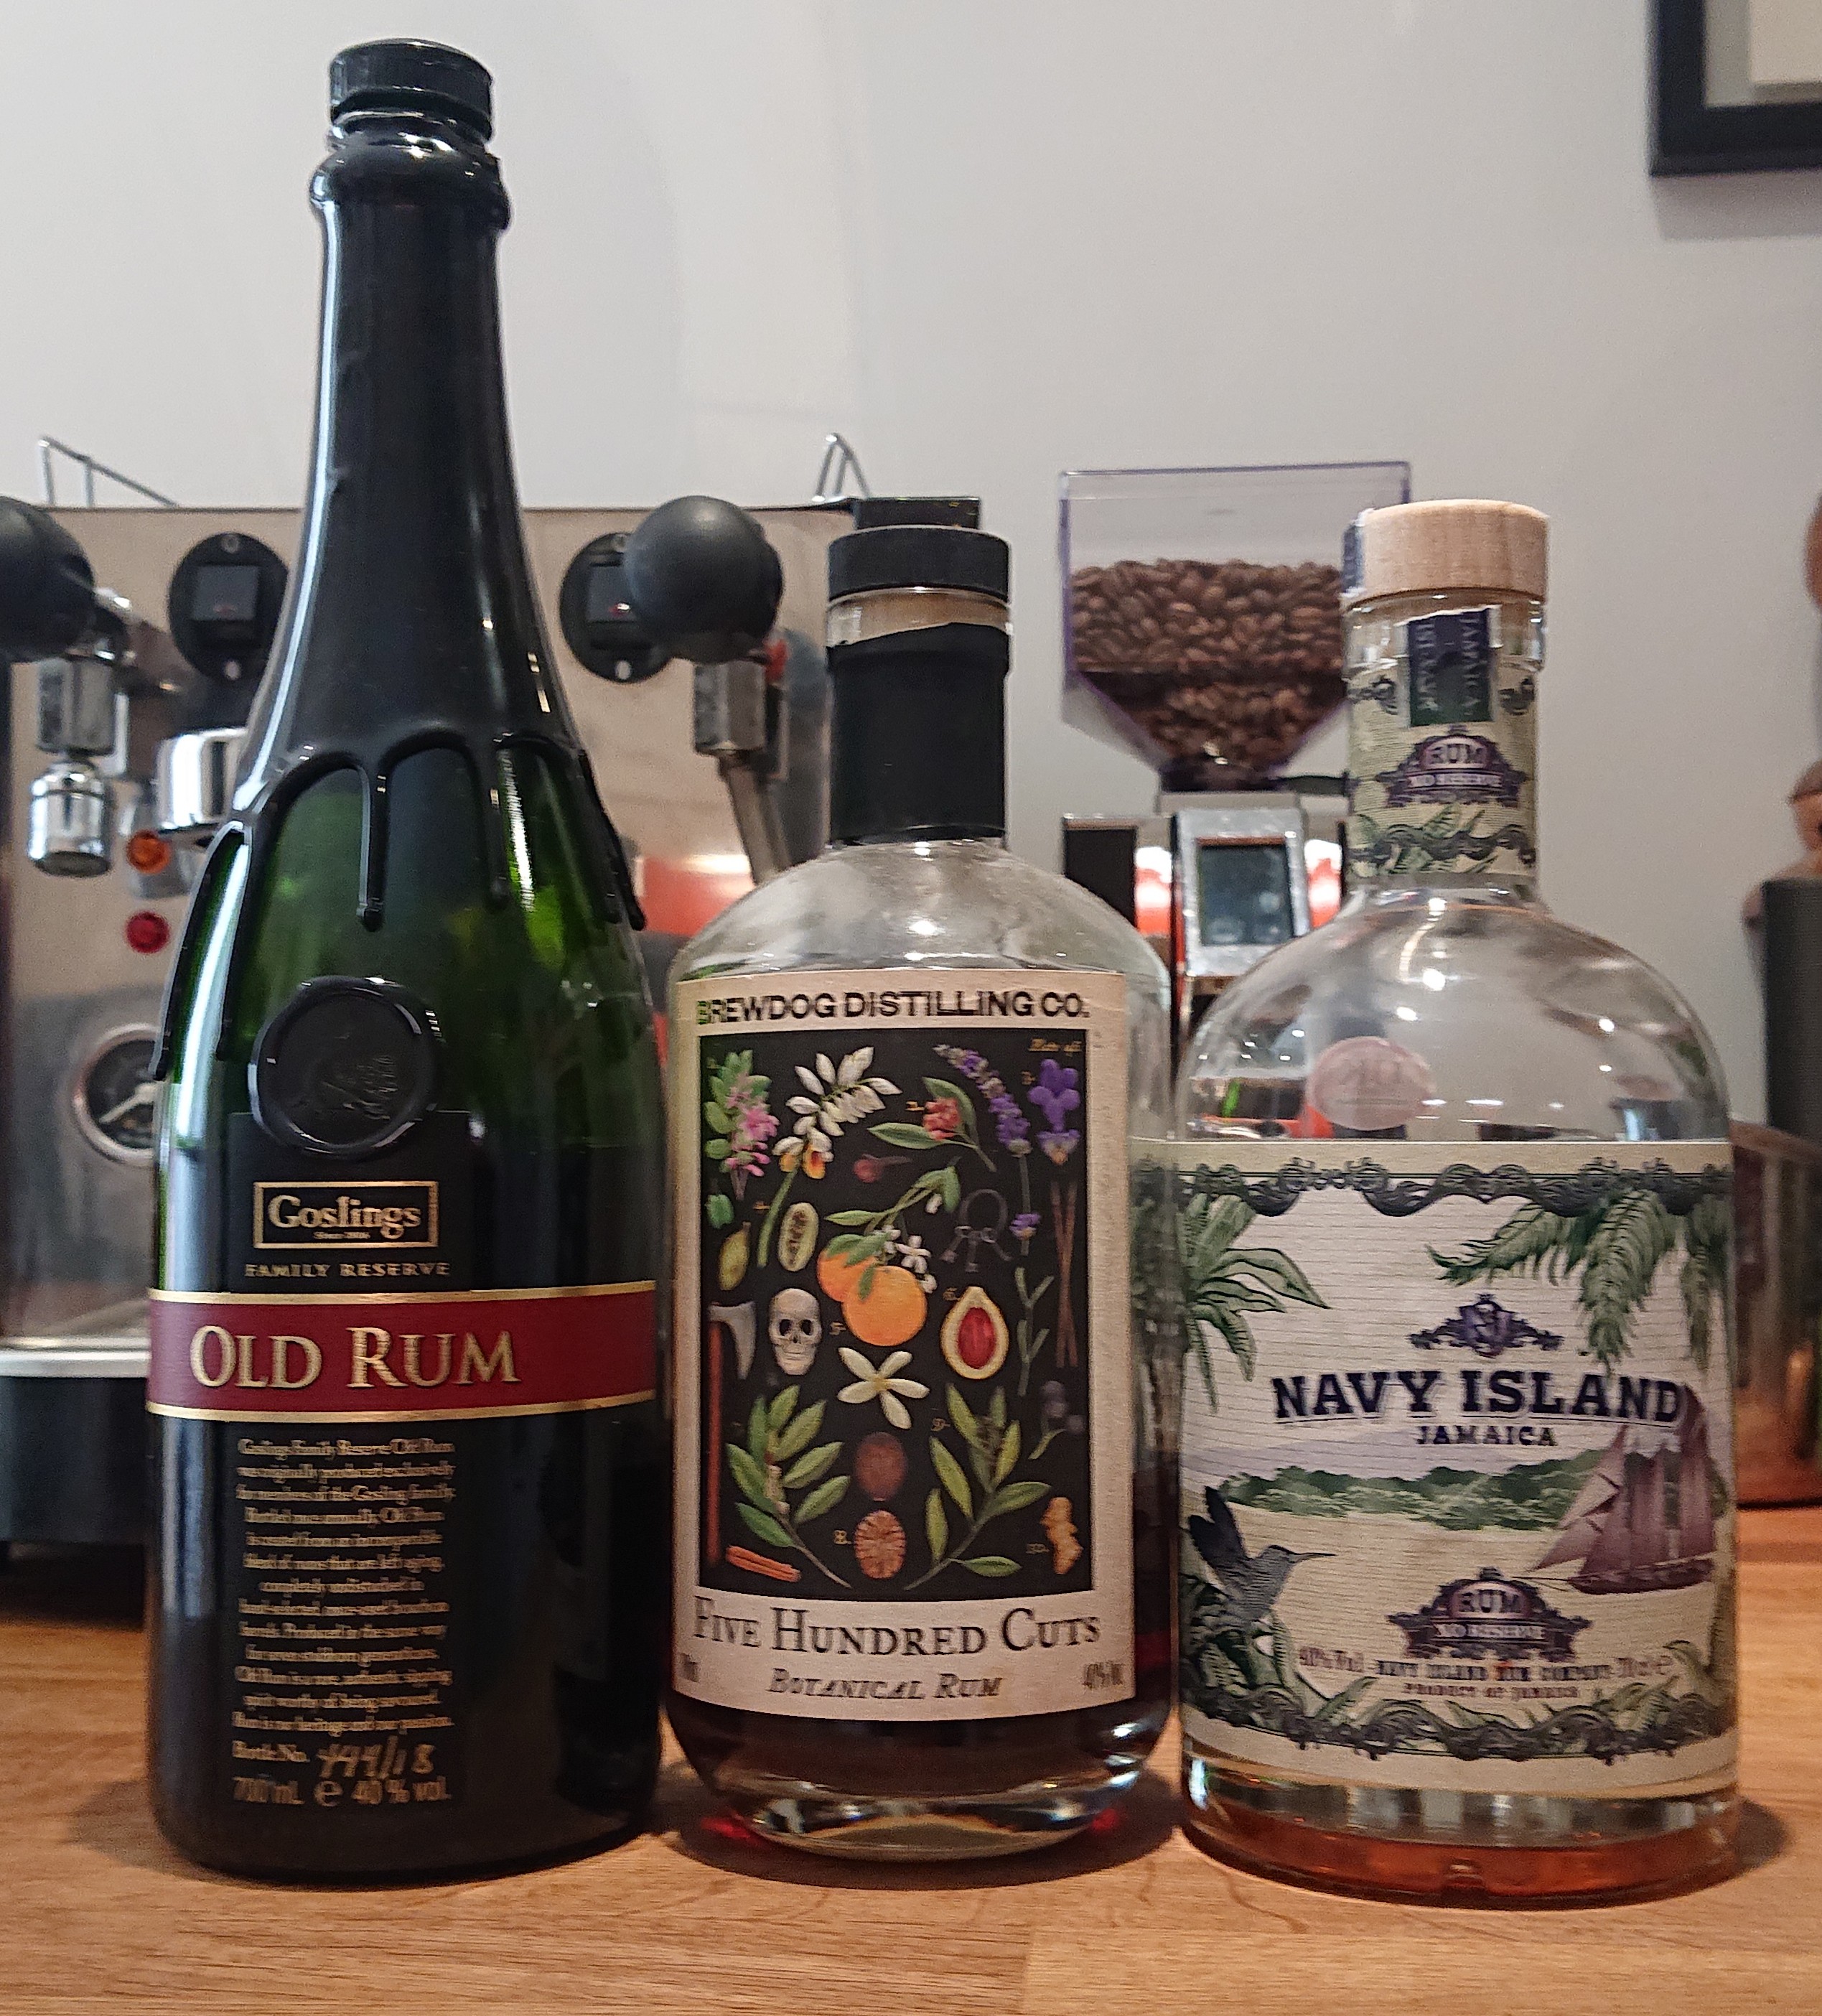 Show us your Rum - Page 21 - Food, Drink & Restaurants - PistonHeads